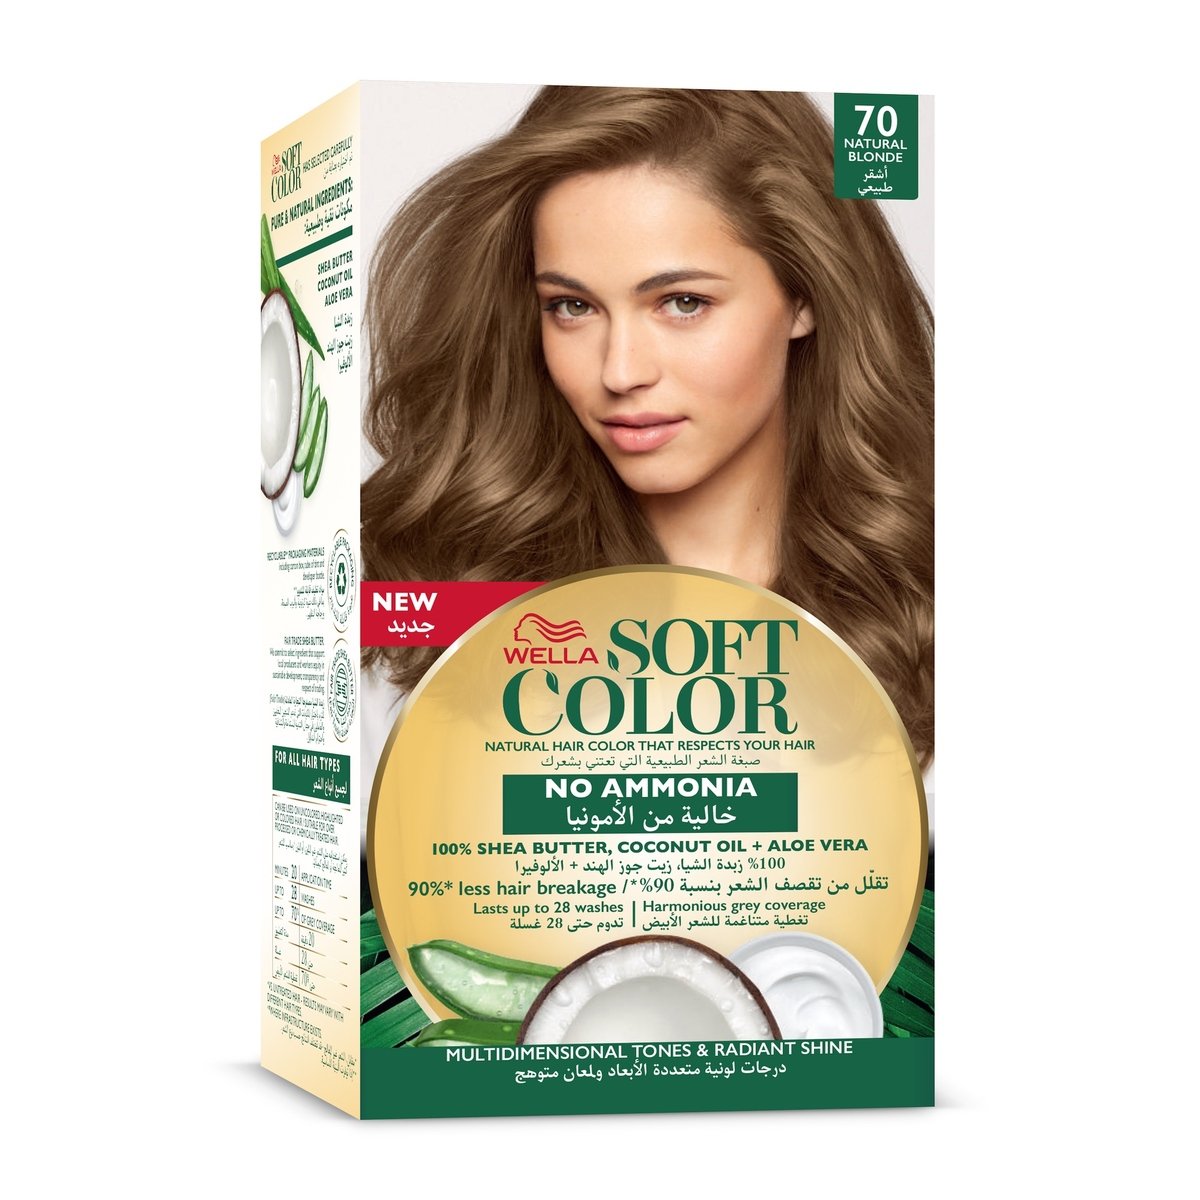 Buy Soft Color Kit 70 Natural Blonde 1 pkt Online at Best Price | Permanent Colorants | Lulu Kuwait in UAE